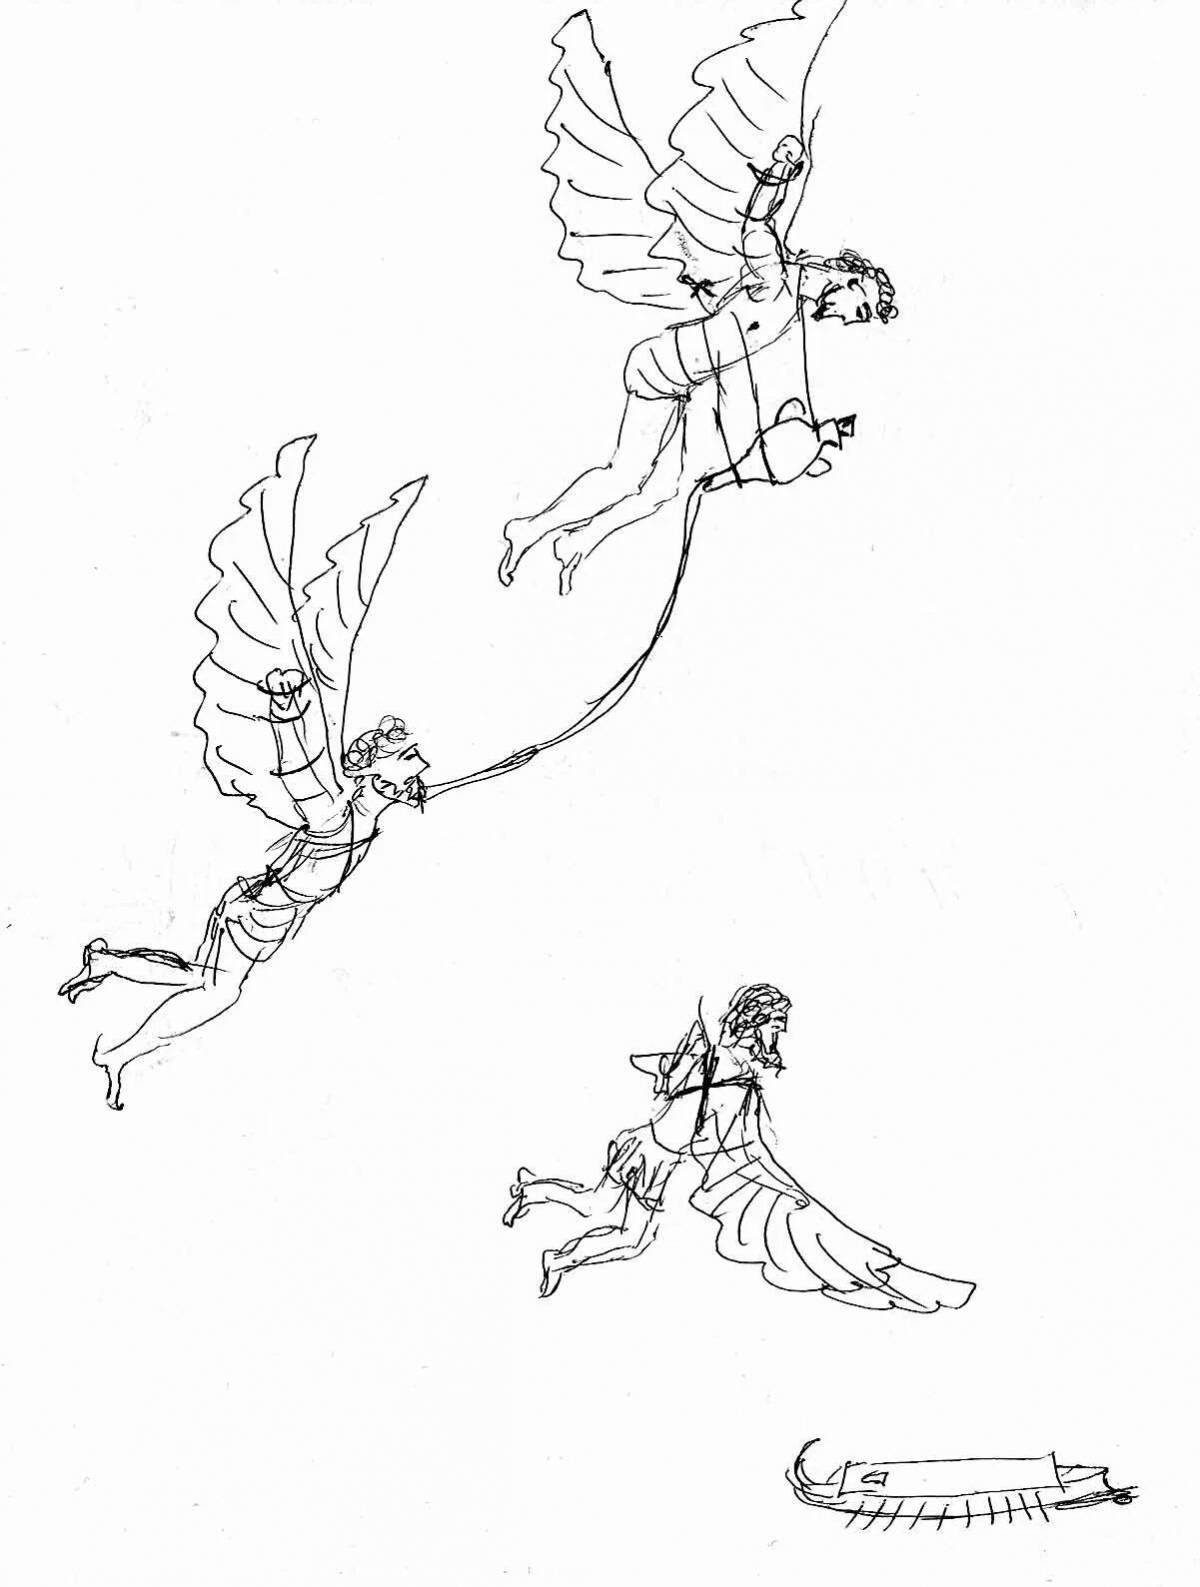 Amazing Daedalus and Icarus coloring page